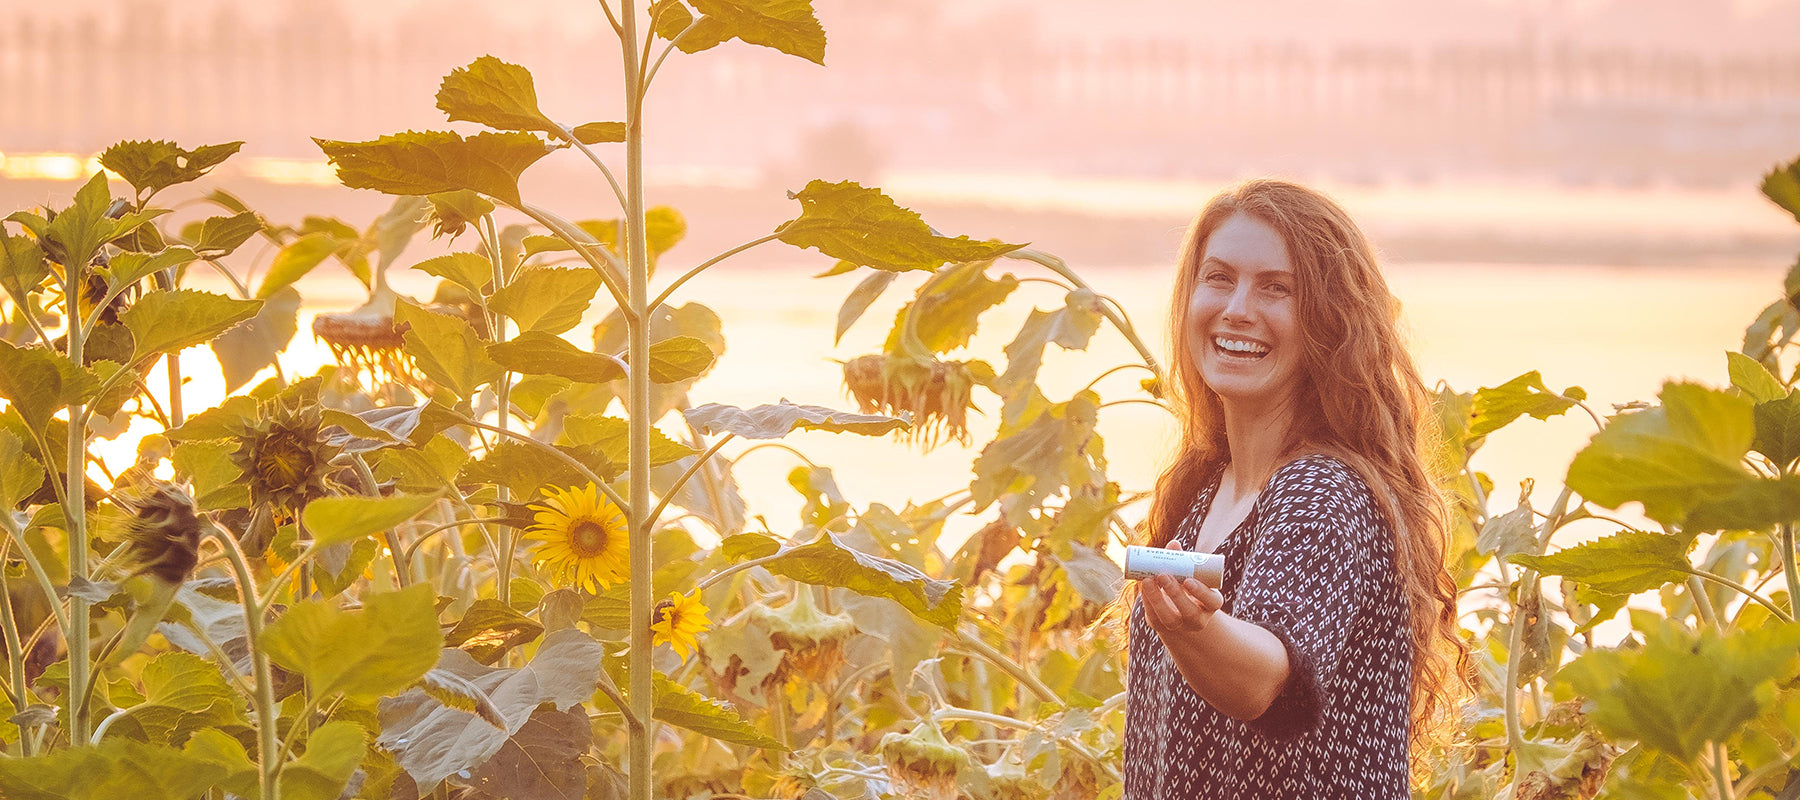 Woman in sunflower field whit ocean in the background, holding an Everkind deodorant.